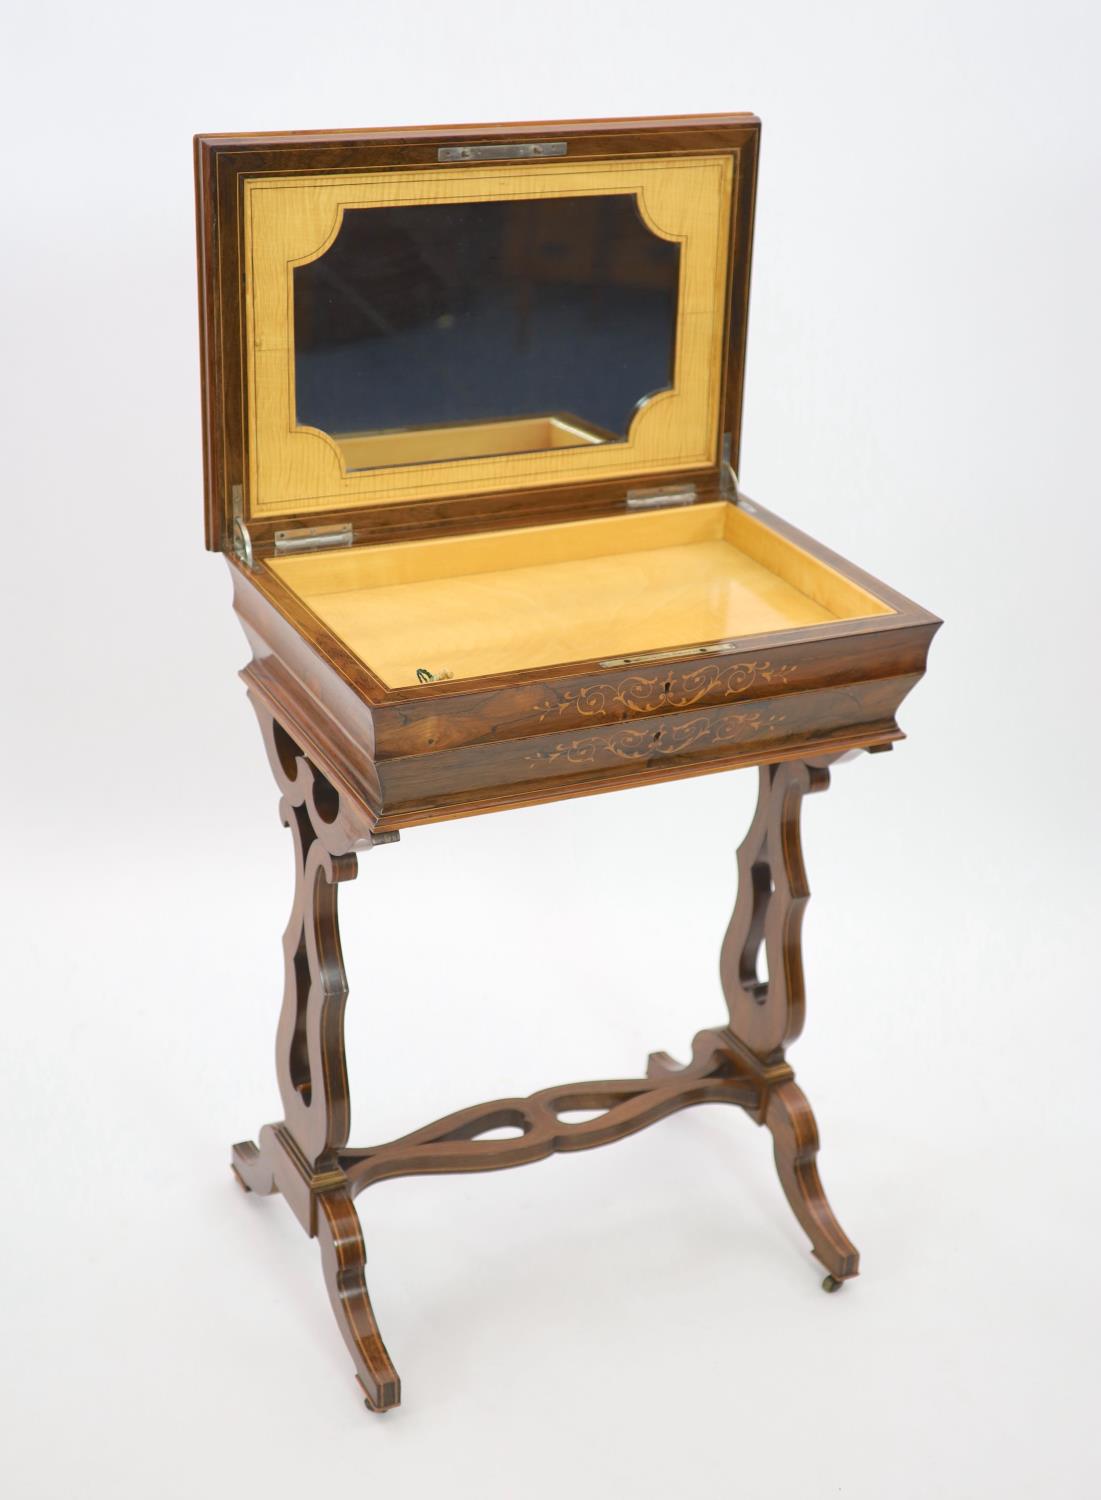 A 19th century French rosewood and sycamore lined lady's dressing table, c.1830, by Alphonse Giroux, - Image 2 of 6